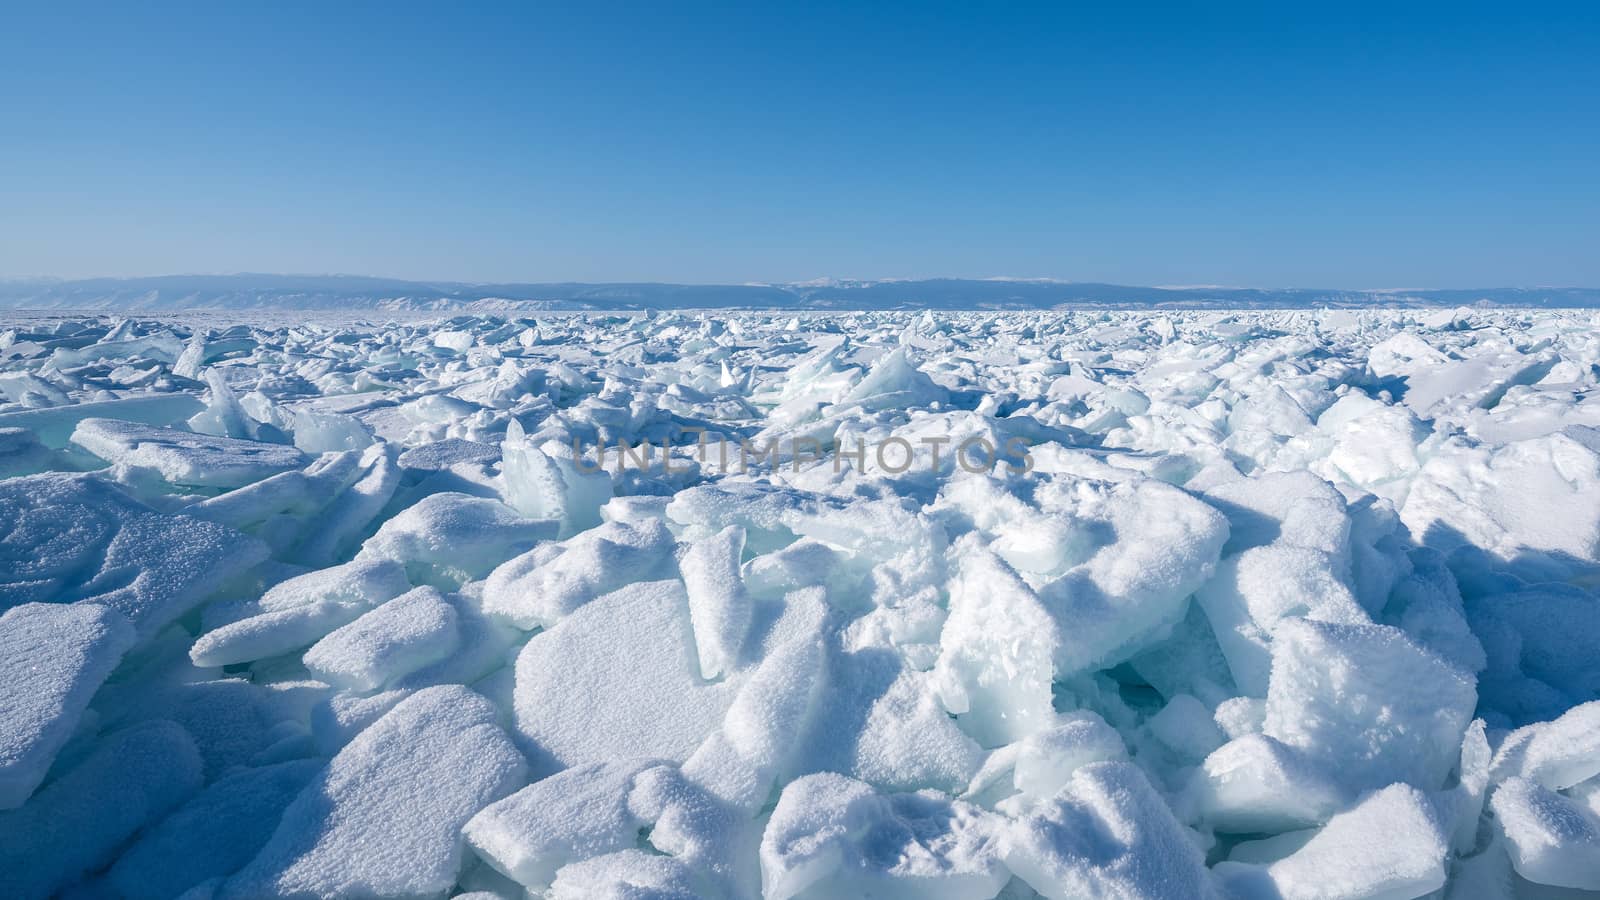 Winter landscape of the frozen Baikal Lake. Fields of ice hummocks with heaps of large blocks of ice. Nature Background.